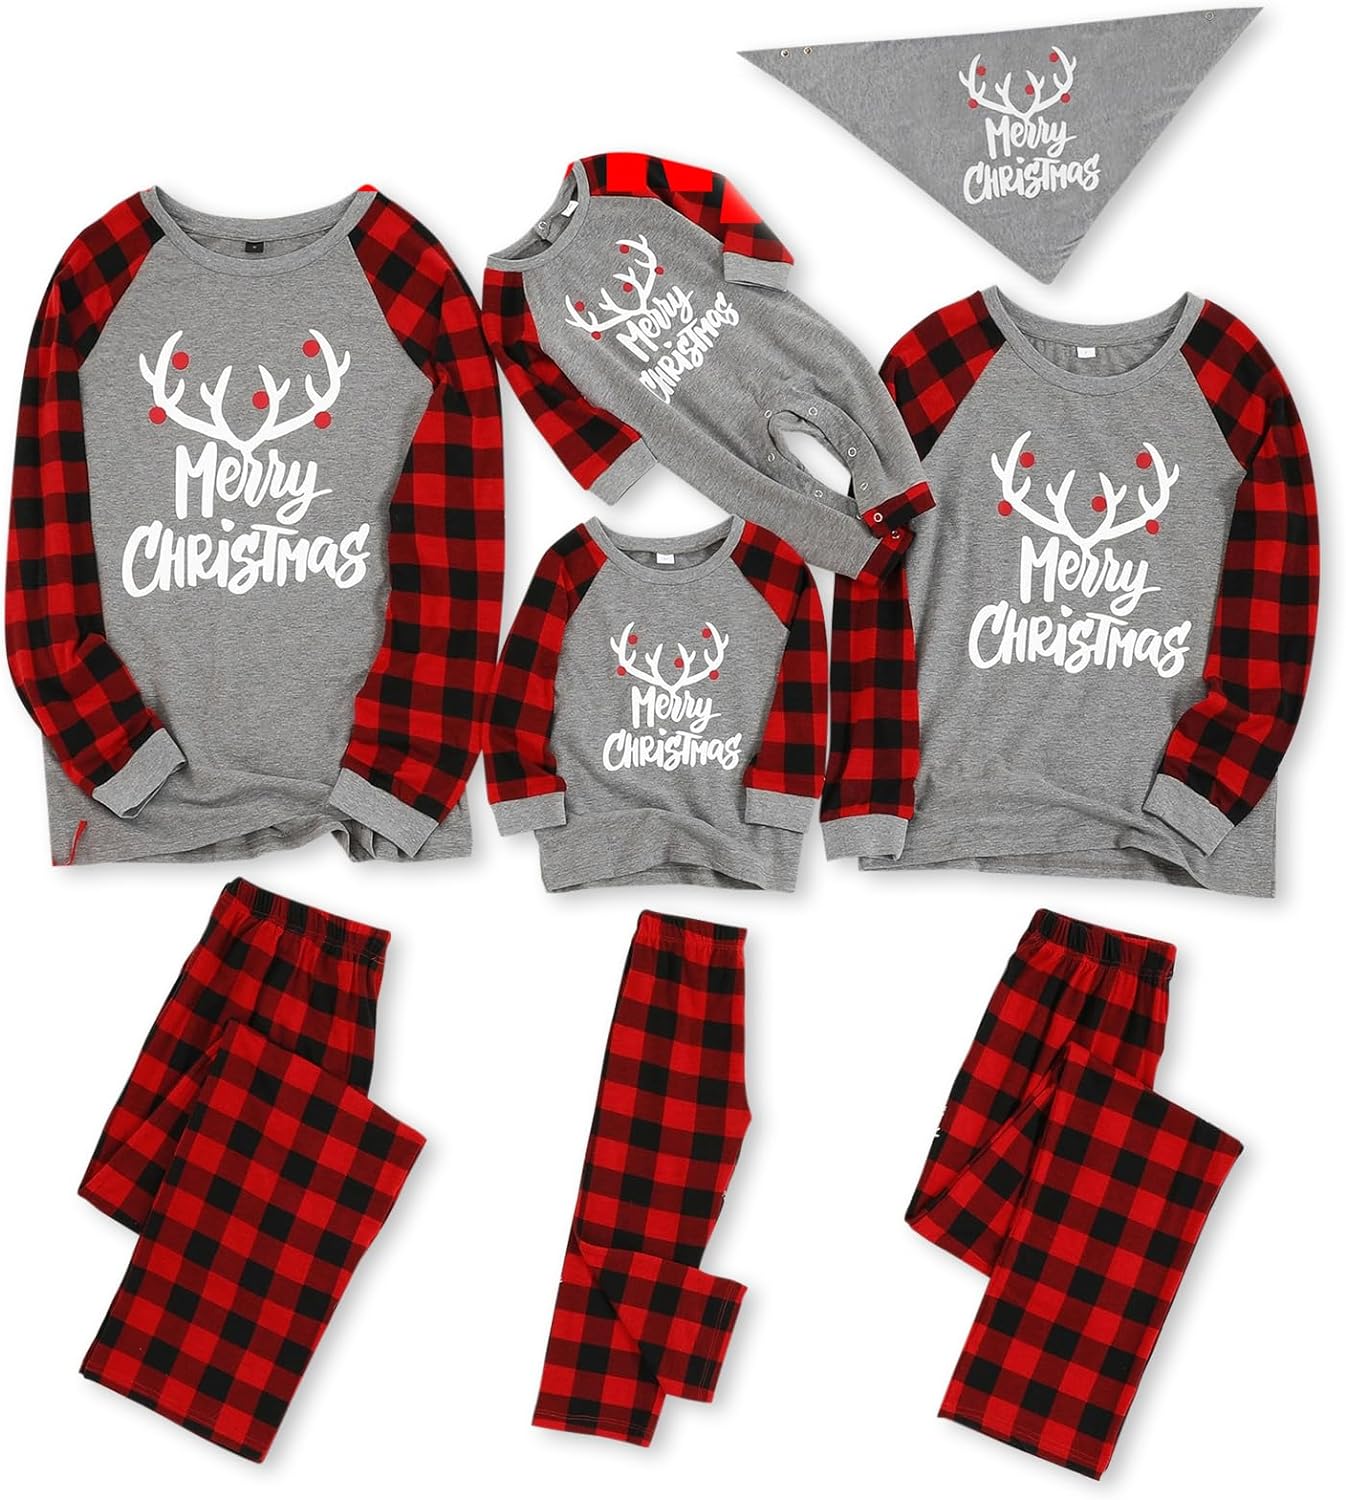 IFFEI Matching Family Pajamas Sets Christmas PJs with Letter and Plaid Printed Long Sleeve Tee and Bottom Loungewear